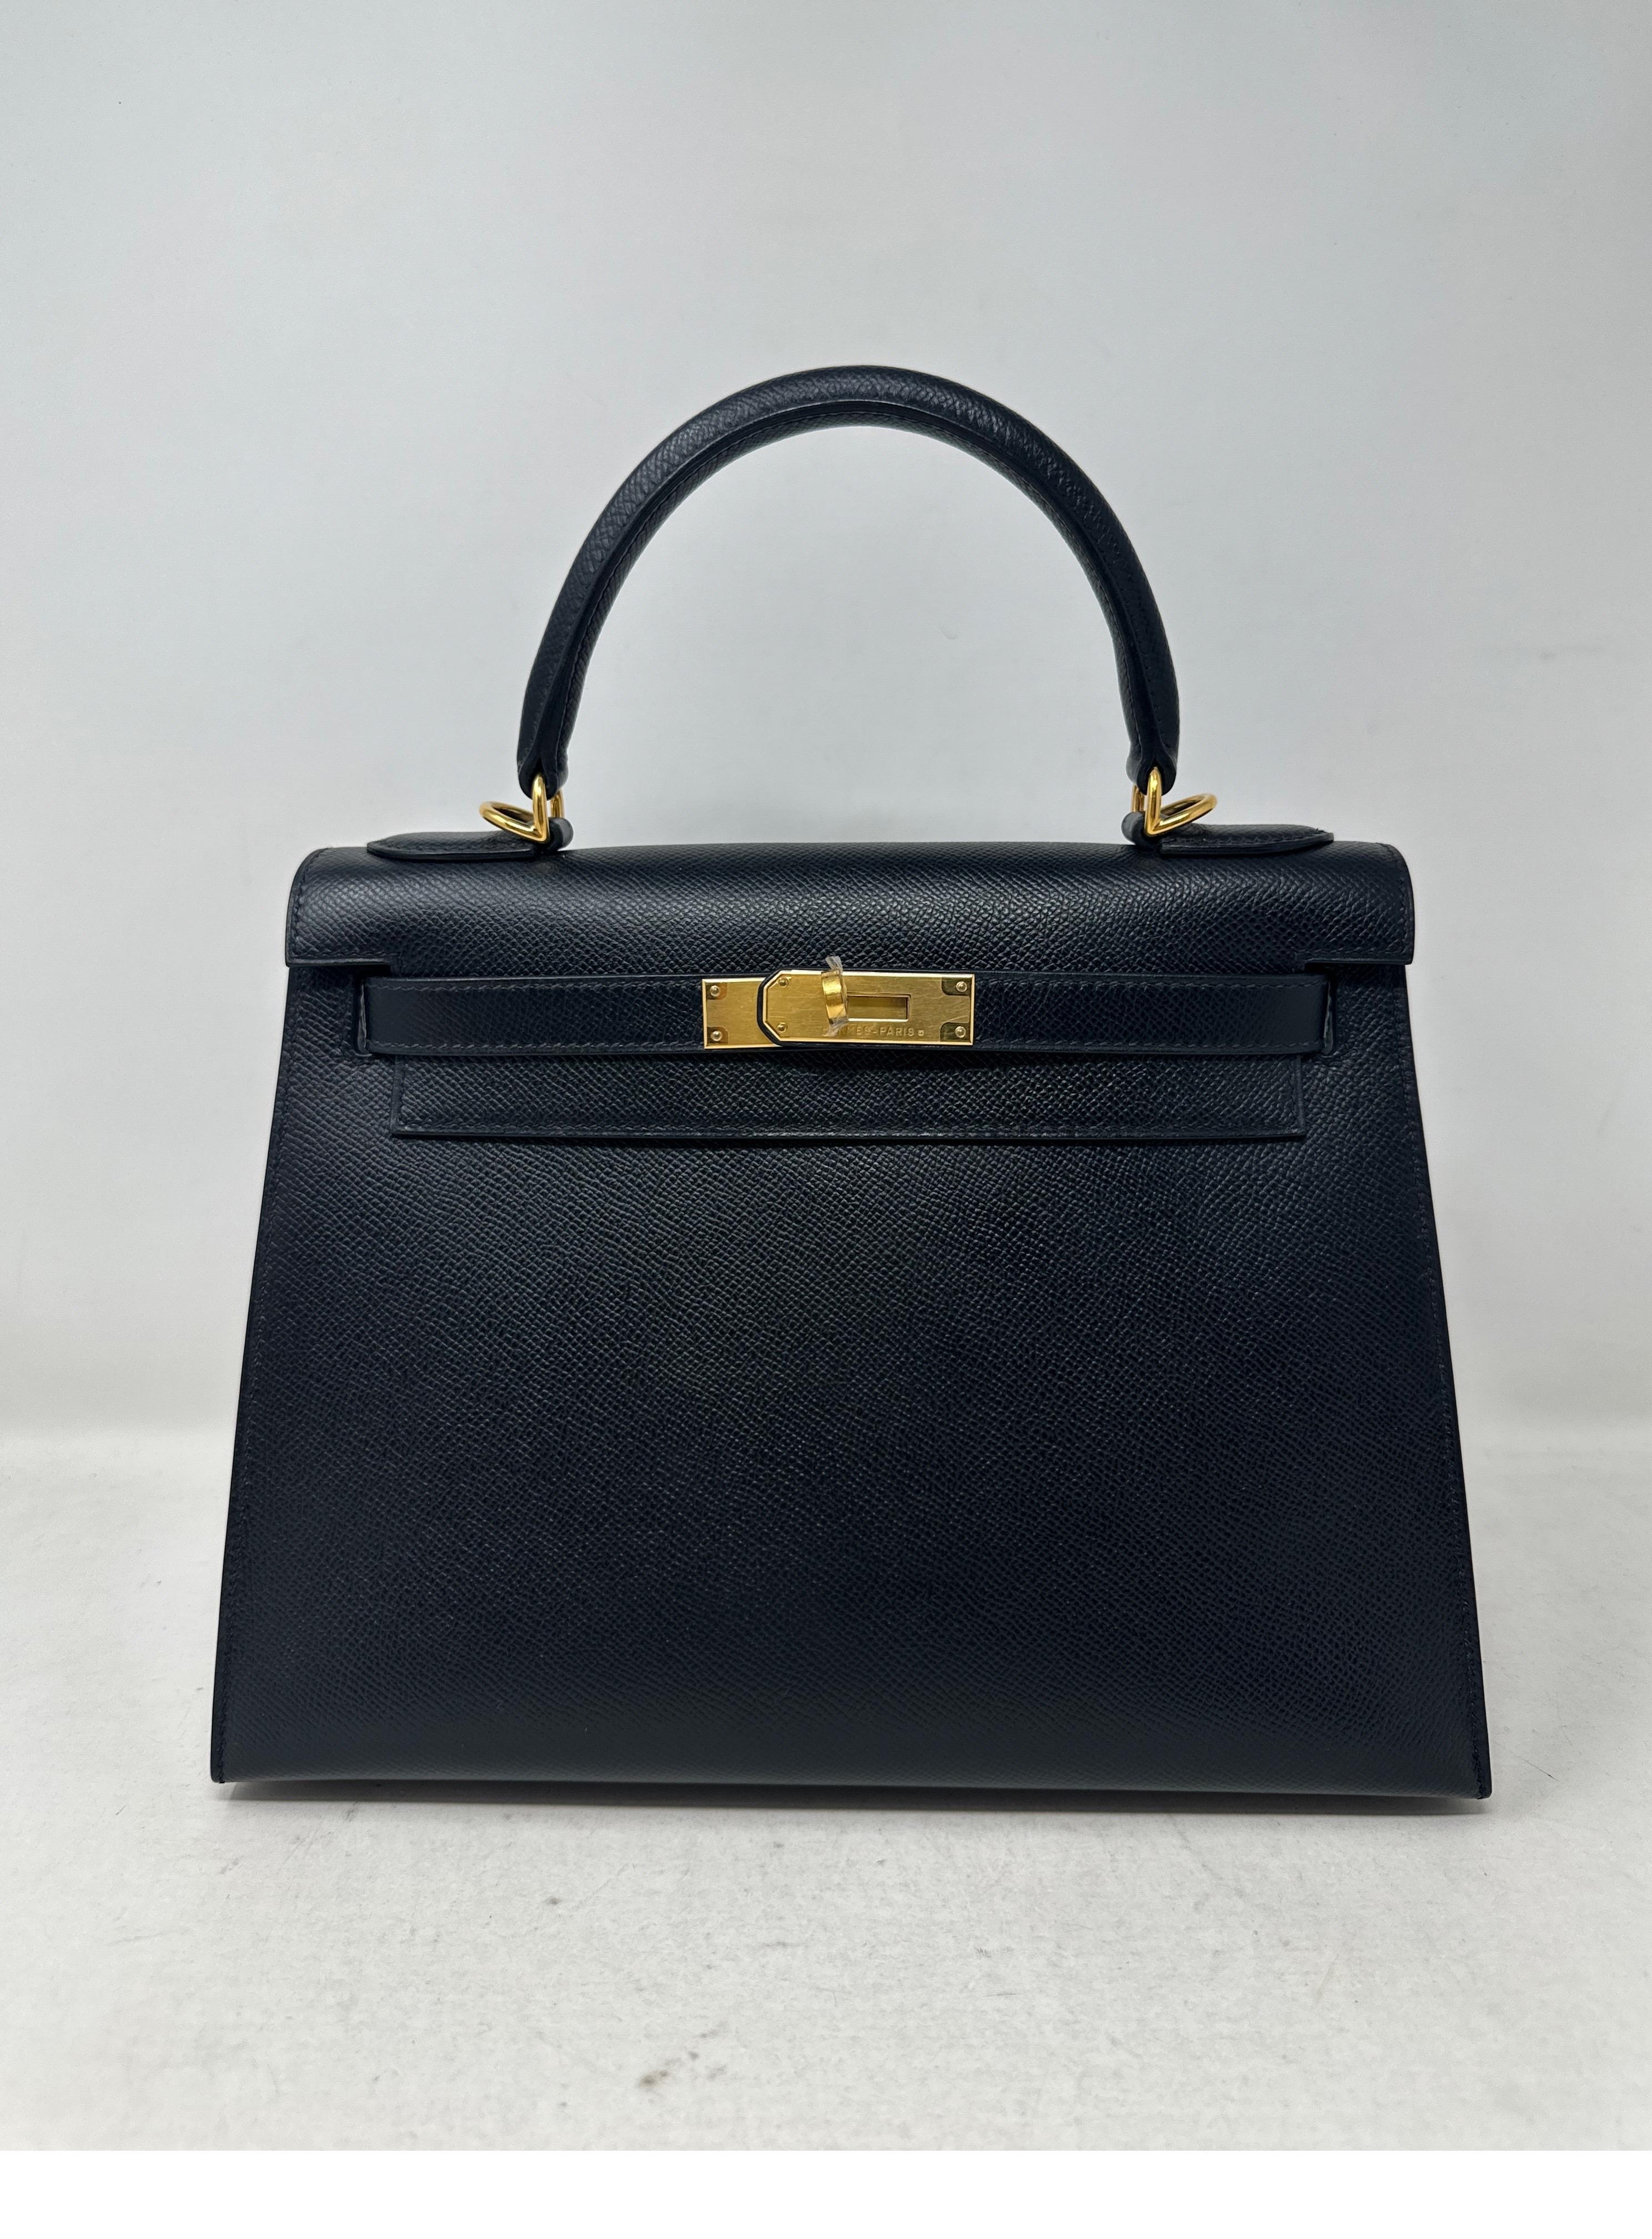 Hermes Black Kelly 28 Bag. Looks new. Excellent condition. Black sellier epsom leather. Gold hardware. Plastic is still on hardware. Never used. Includes clochette, lock ,keys, and dust bag. Guaranteed authentic. 